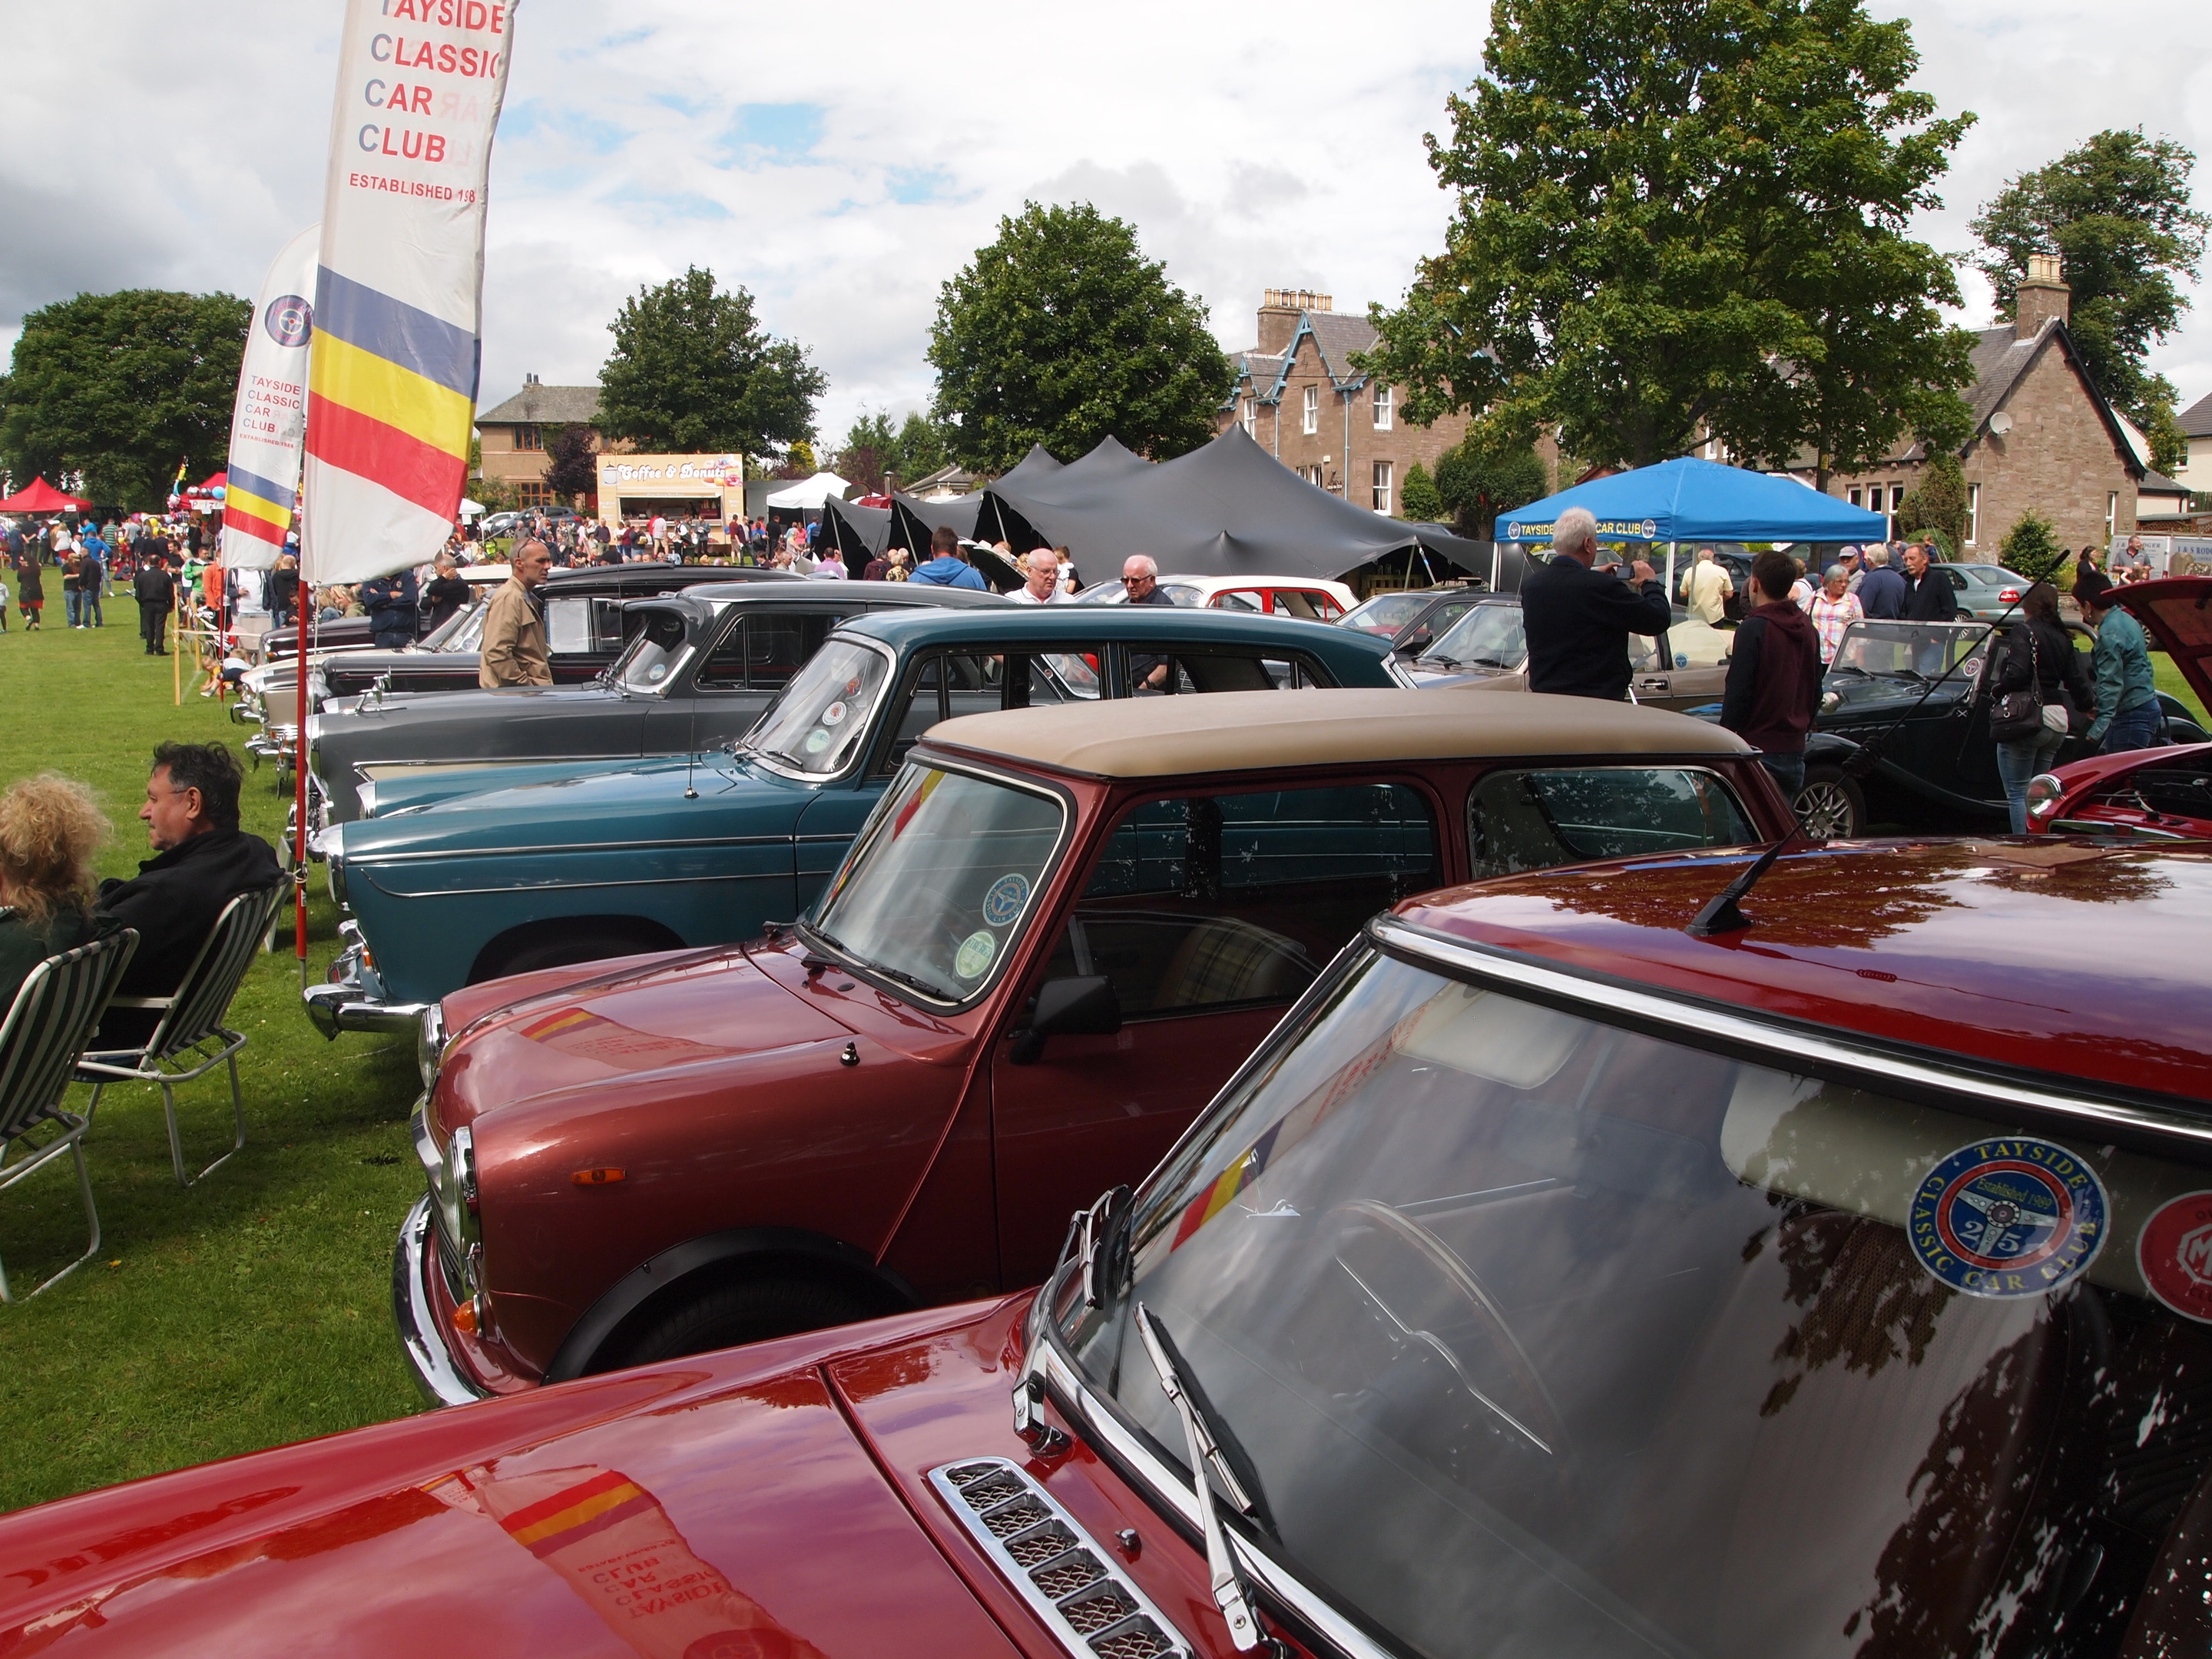 A variety of classic cars on display.